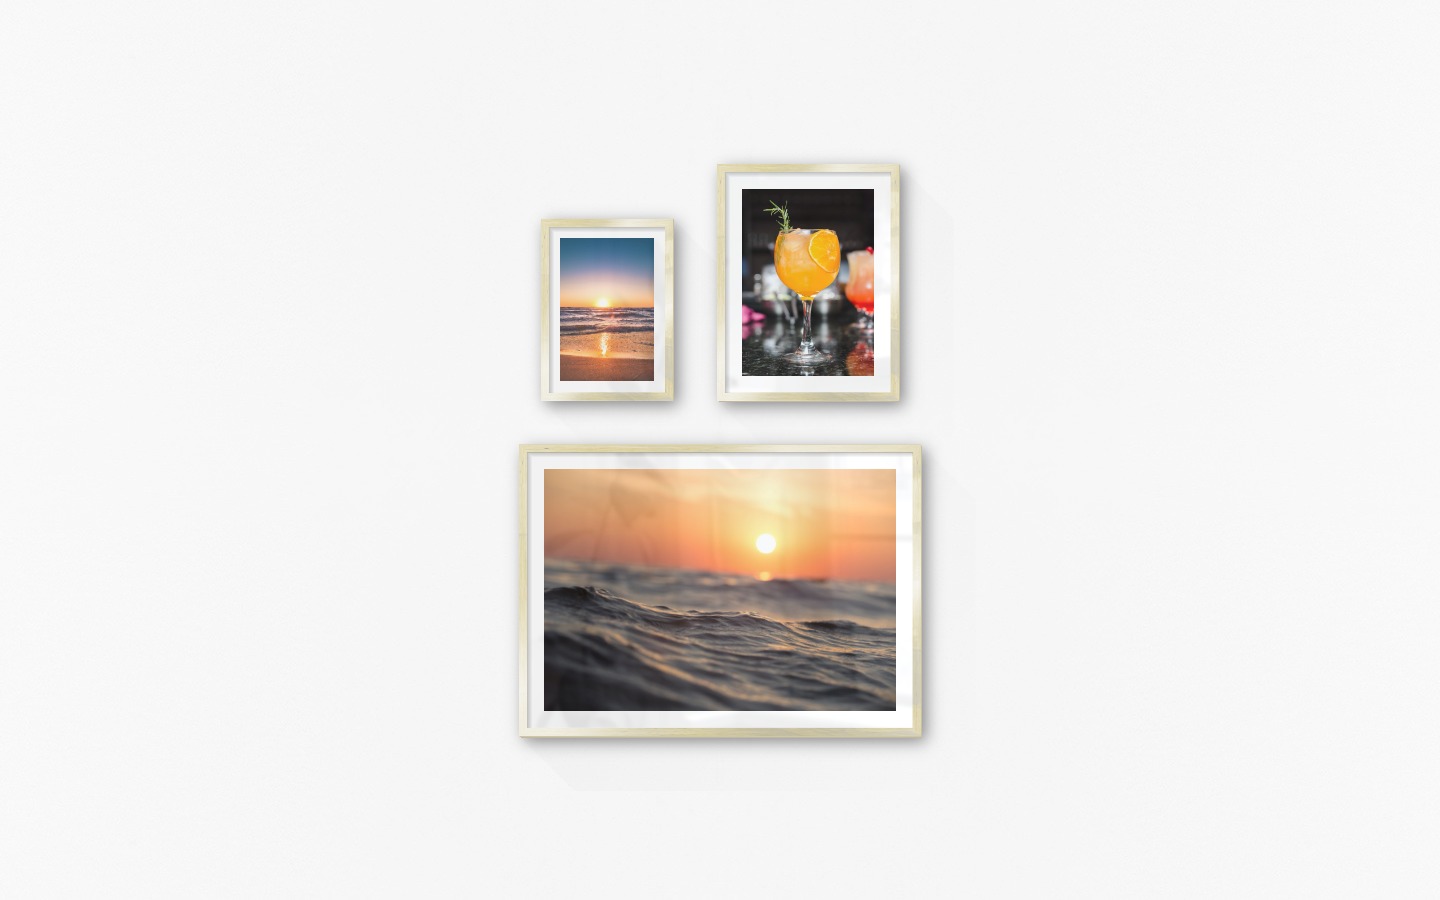 Gallery wall with picture frames in gold in sizes 21x30, 30x40 and 50x70 with prints "Sunset", "High orange drink" and "Waves and the sun"